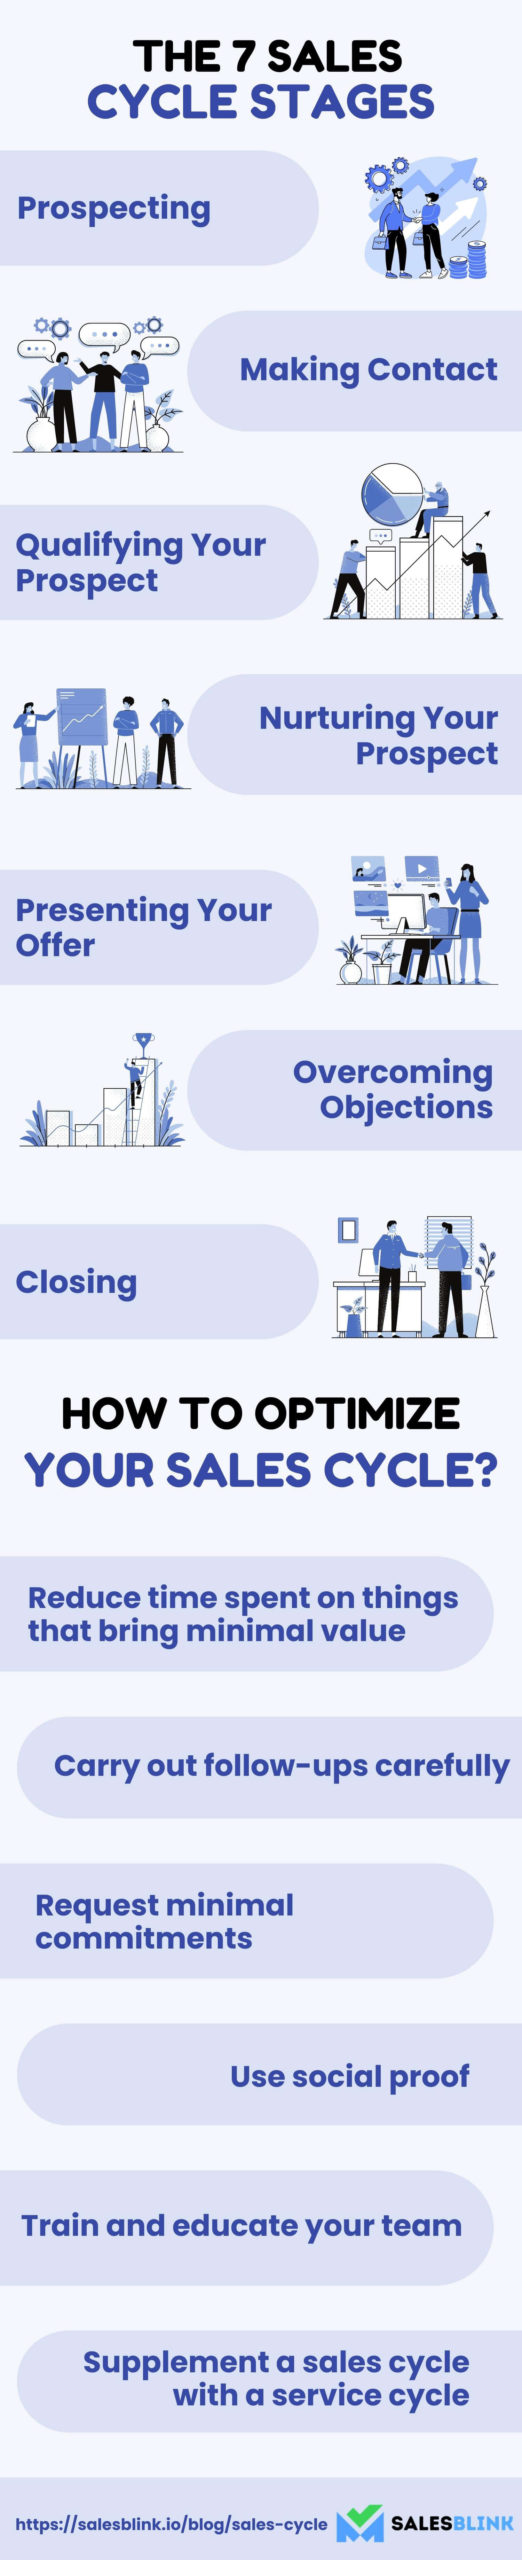 7 Stages of the sales cycle